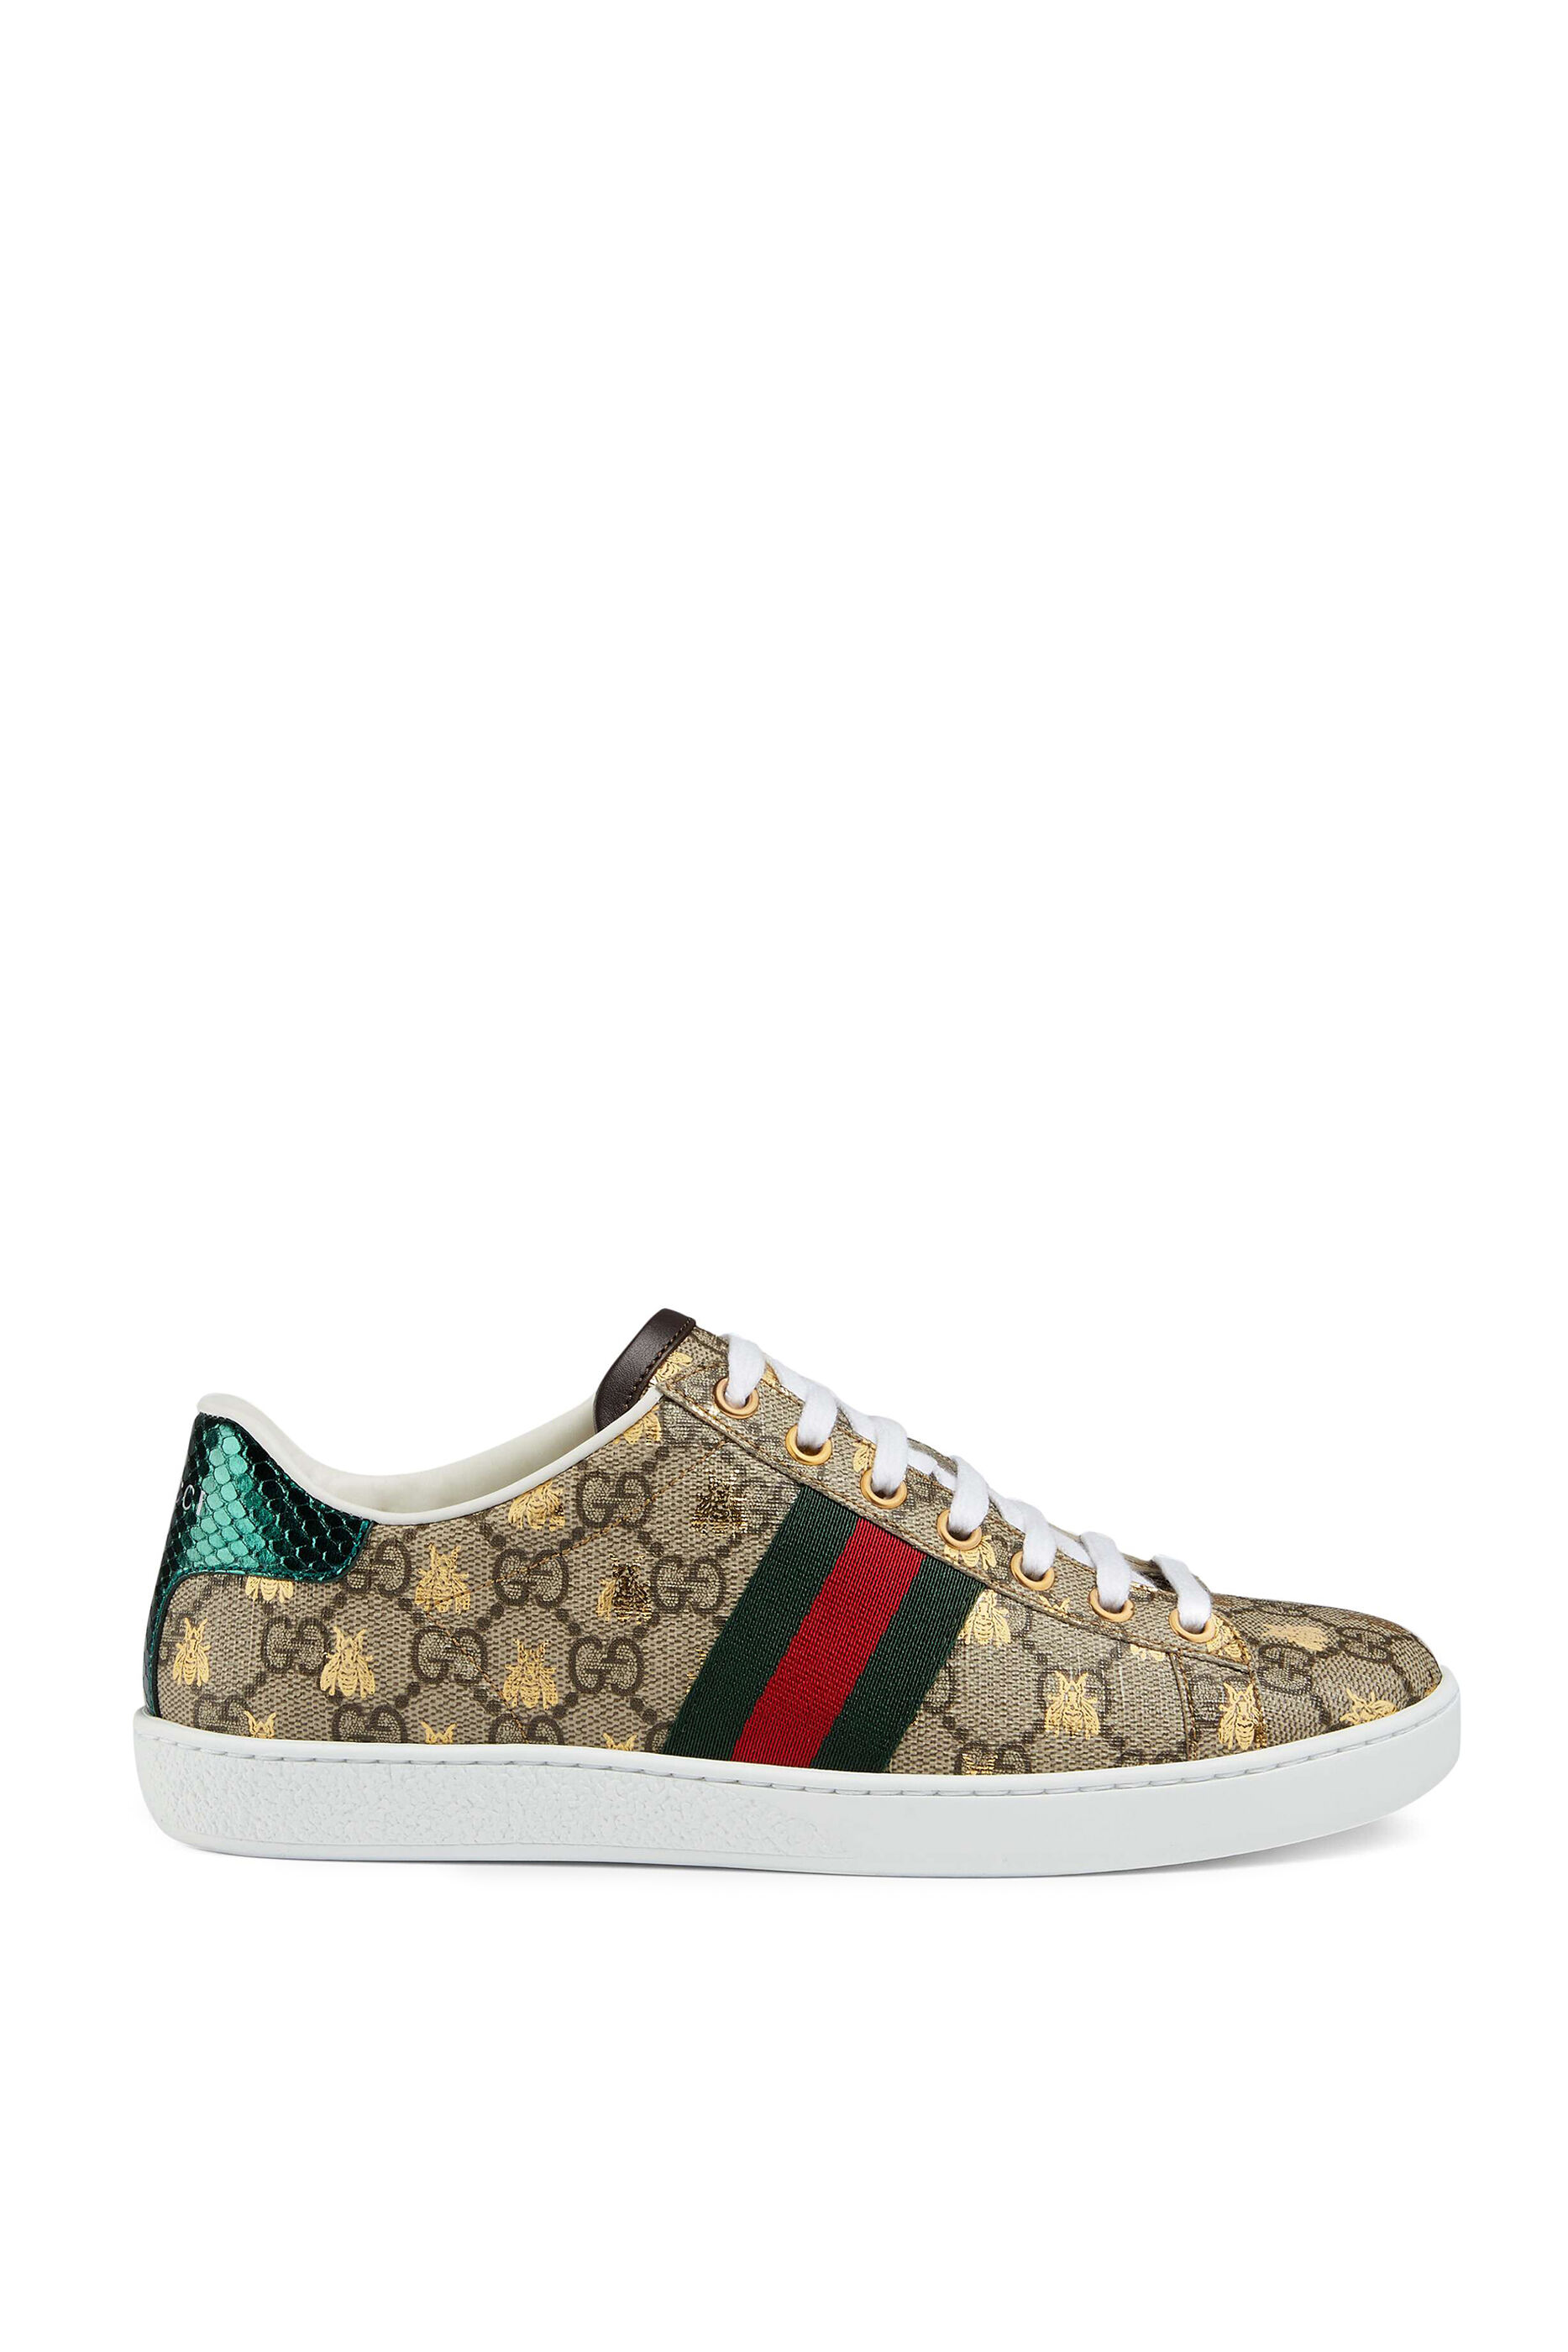 gucci bee tennis shoes